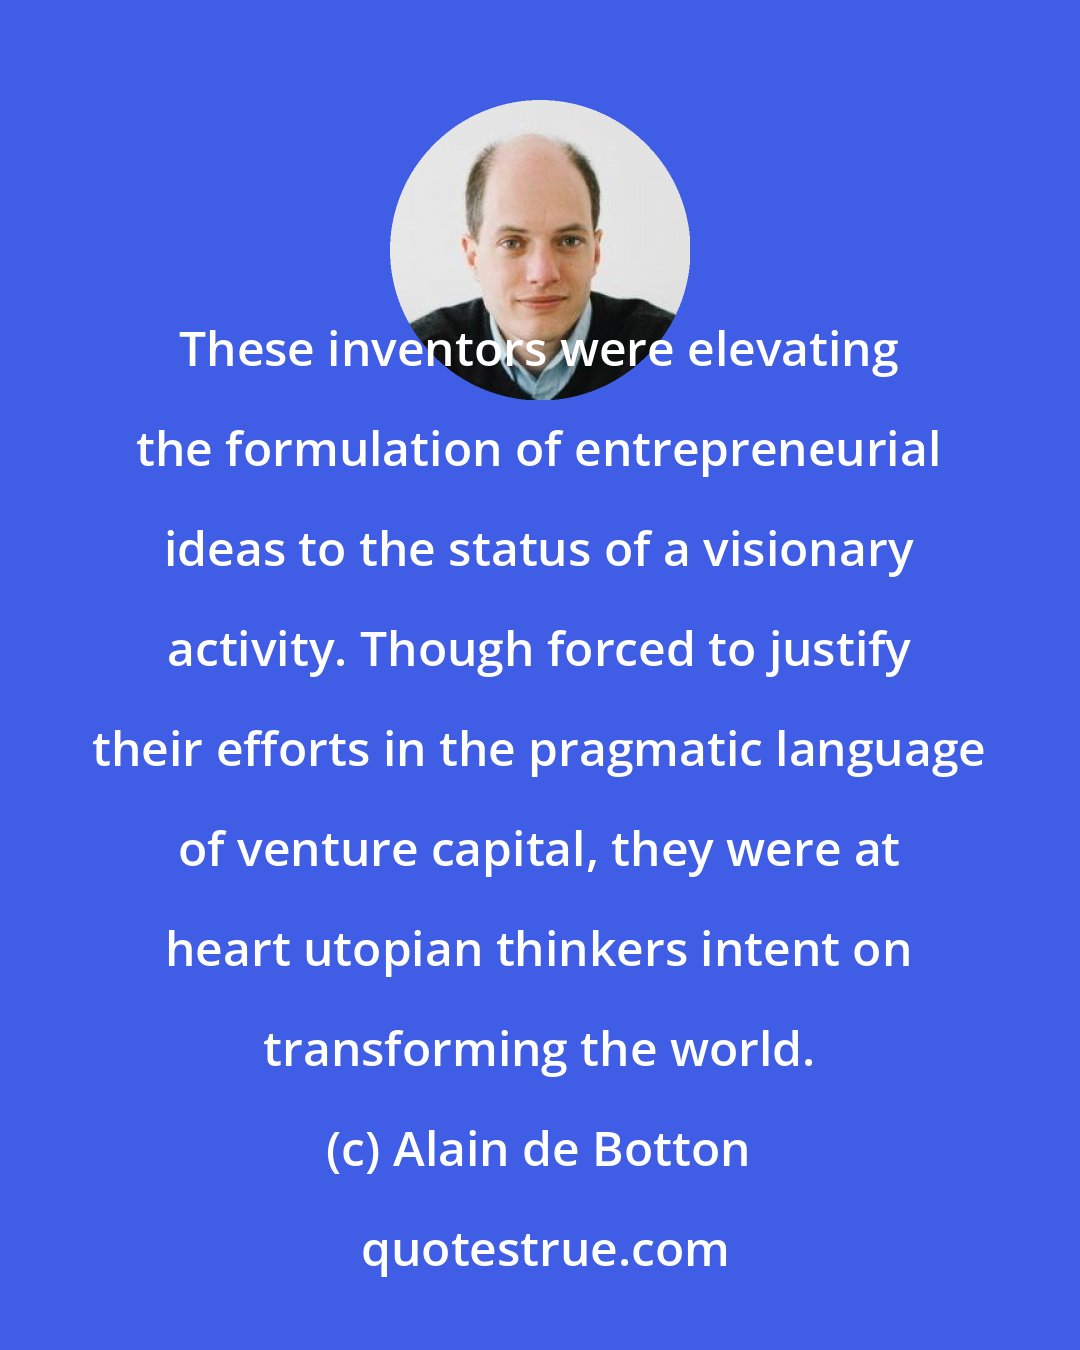 Alain de Botton: These inventors were elevating the formulation of entrepreneurial ideas to the status of a visionary activity. Though forced to justify their efforts in the pragmatic language of venture capital, they were at heart utopian thinkers intent on transforming the world.